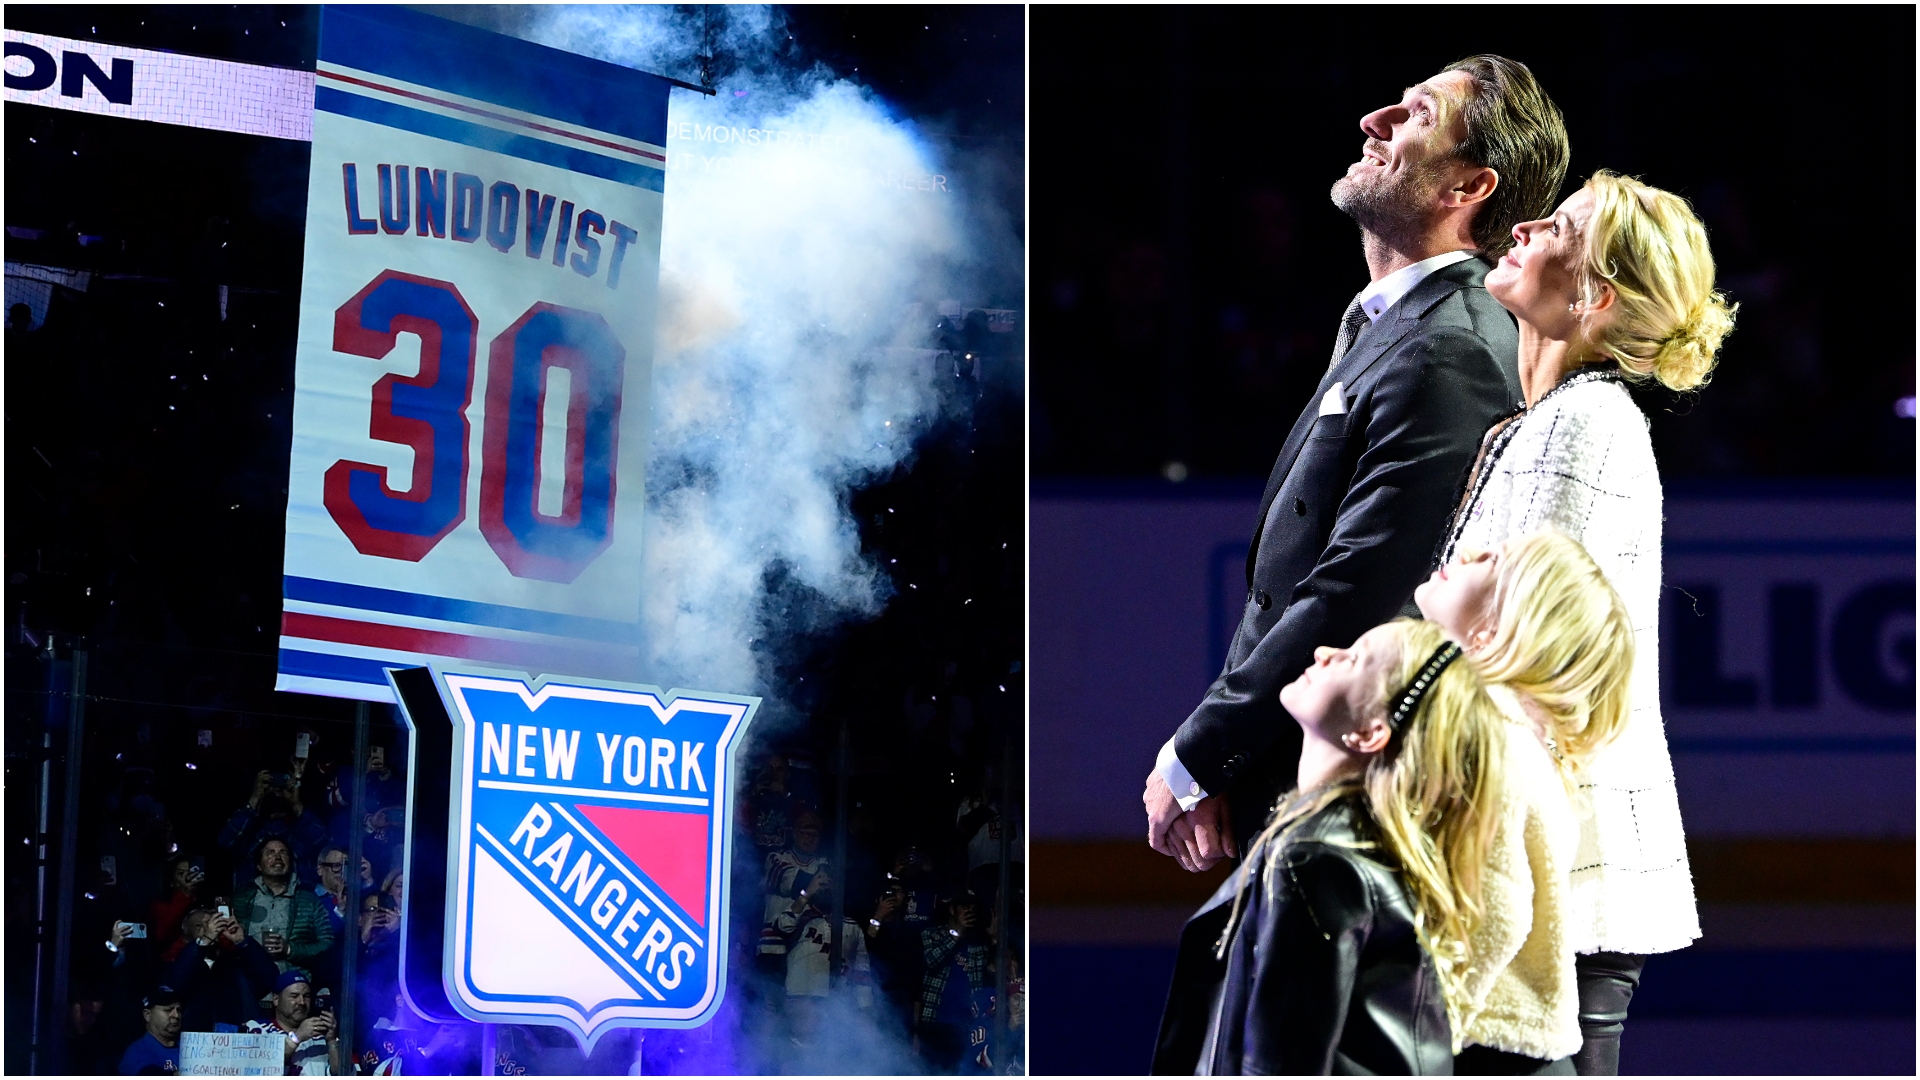 MSG features 30 days of programming in celebration of Henrik Lundqvist